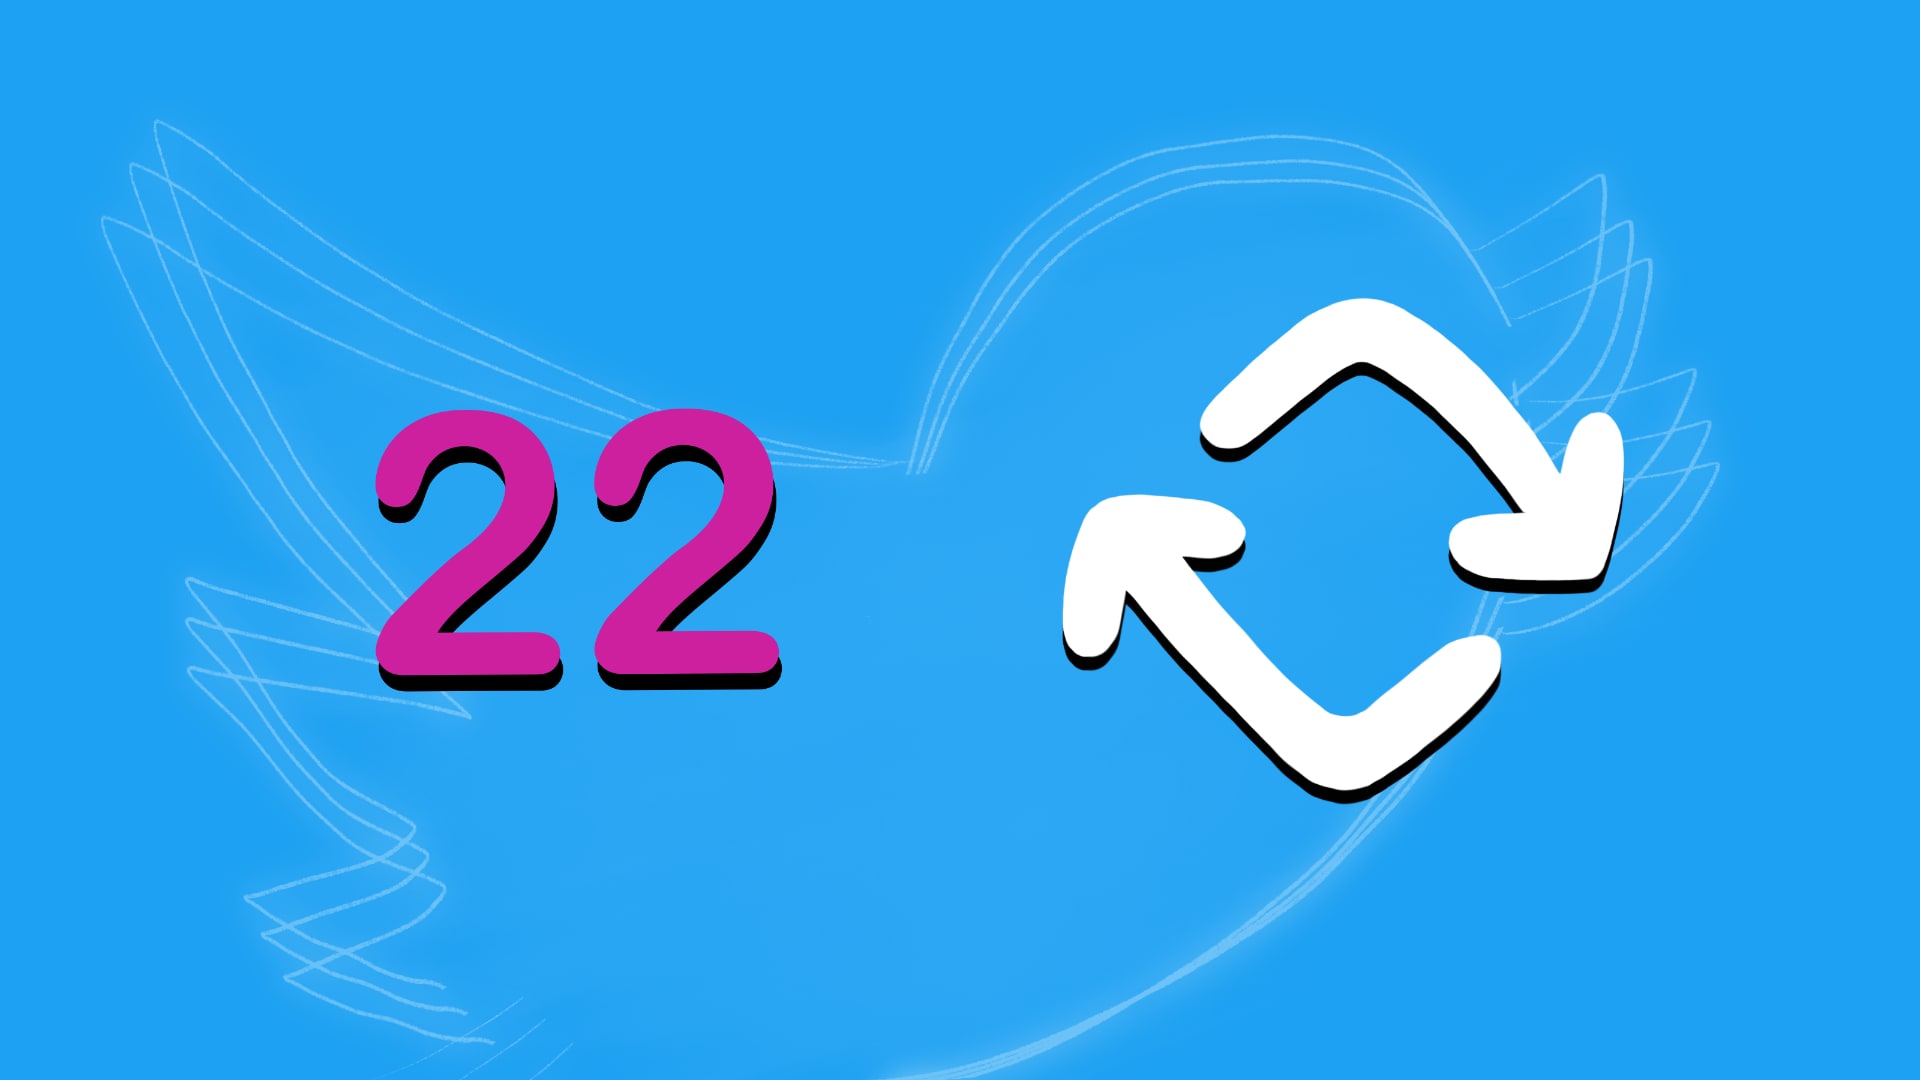 A doodle of Twitter Retweet button with the number 22 on the left.